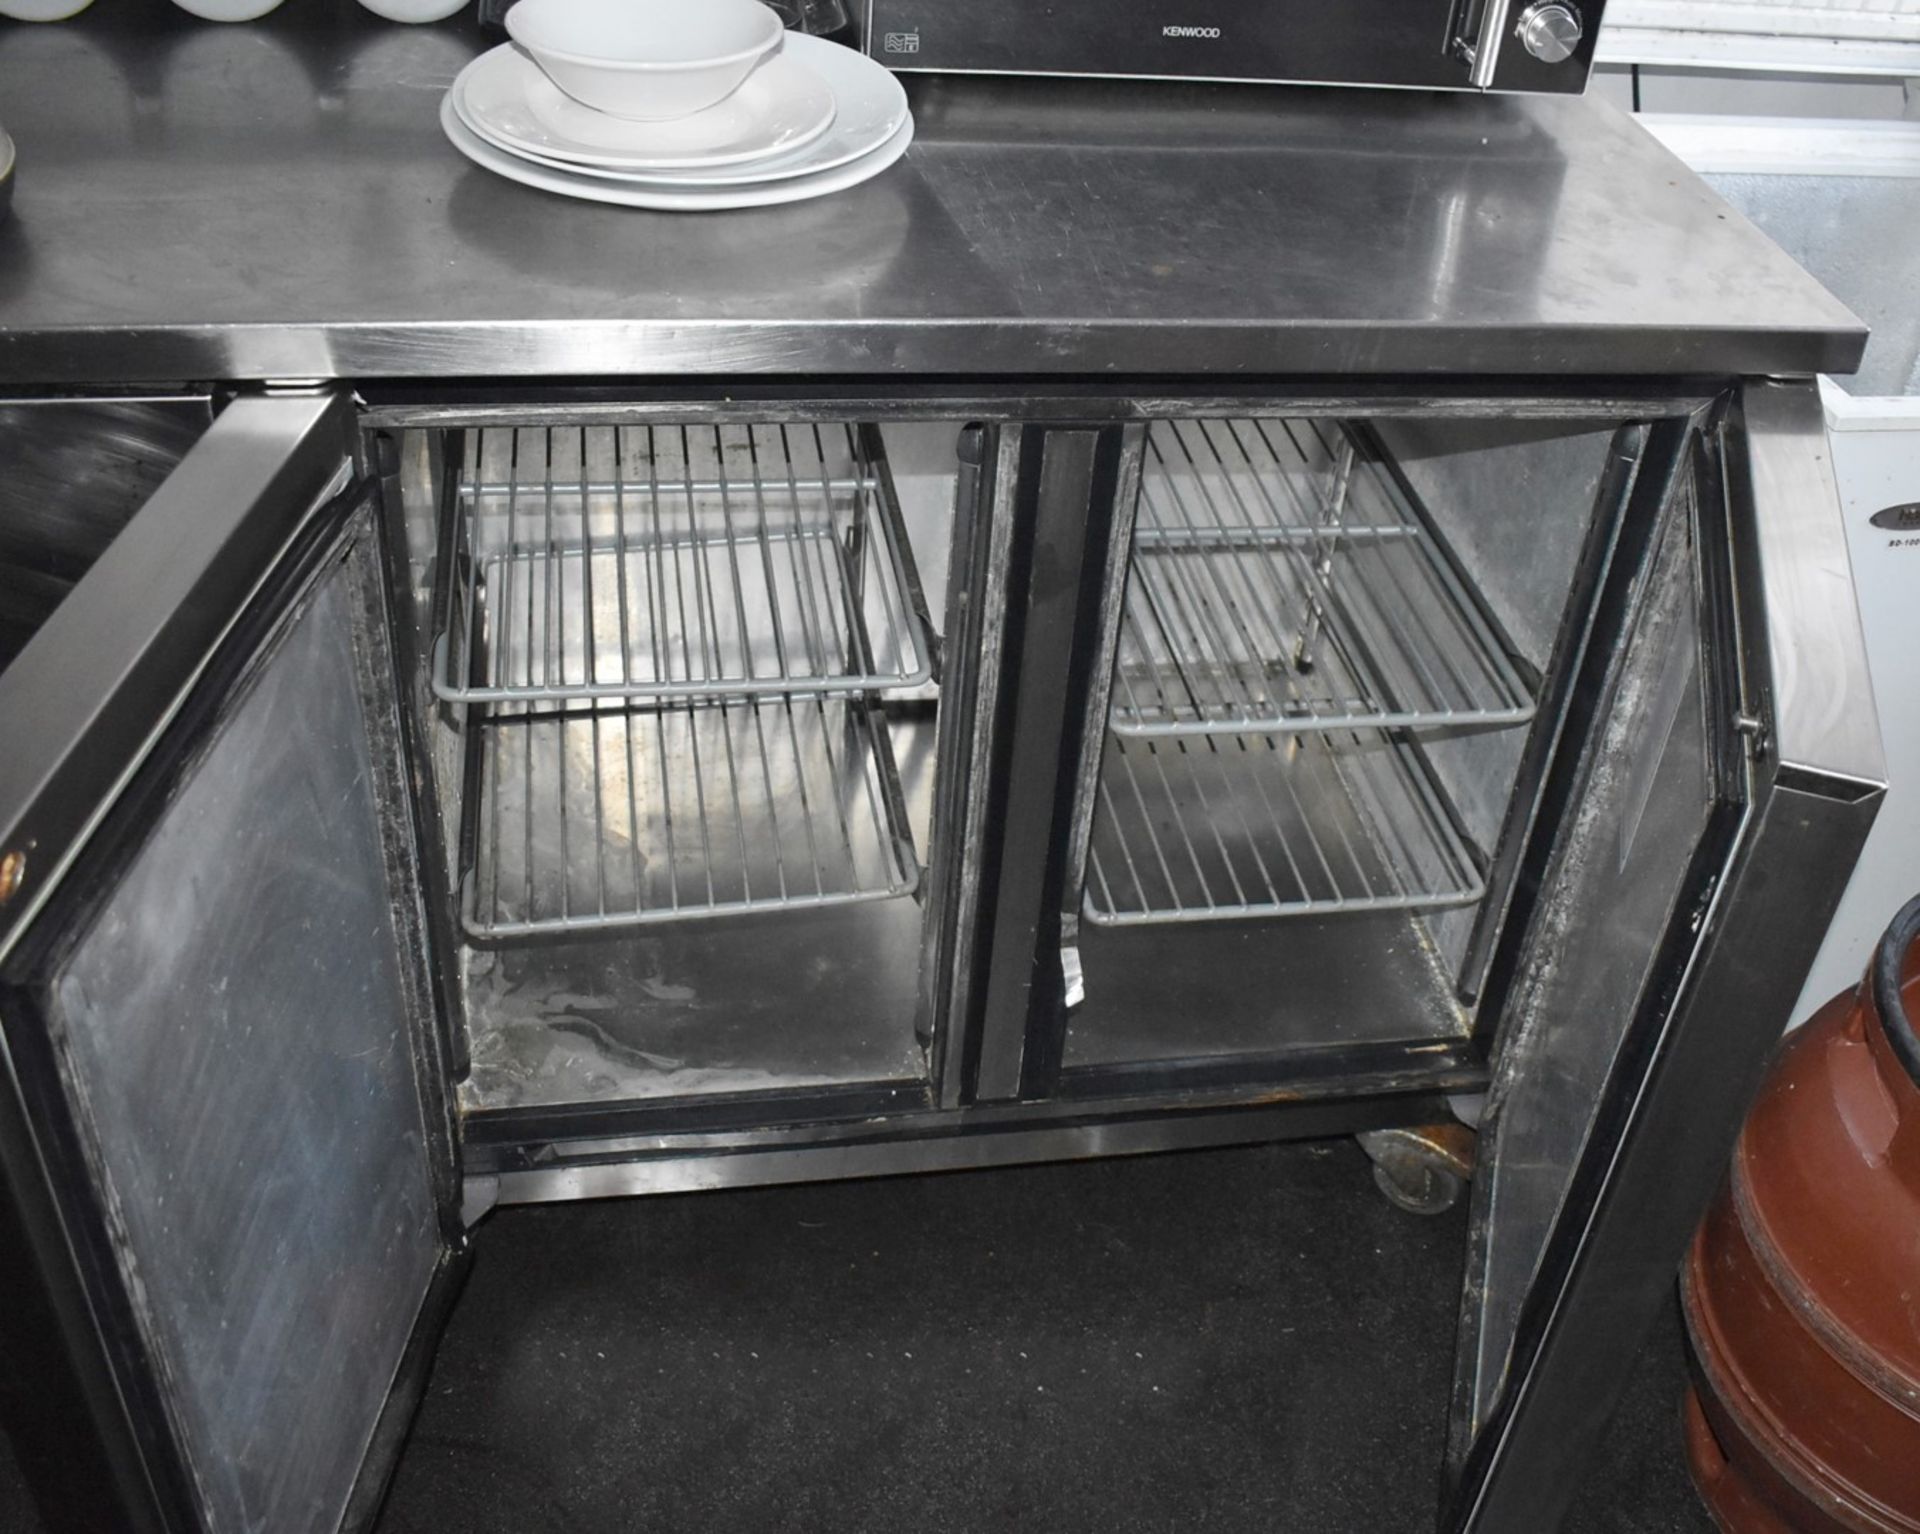 1 x Foster Pro1/2H-A Counter Top Refrigerator - CL586 - Location: Stockport SK1 - Image 3 of 3